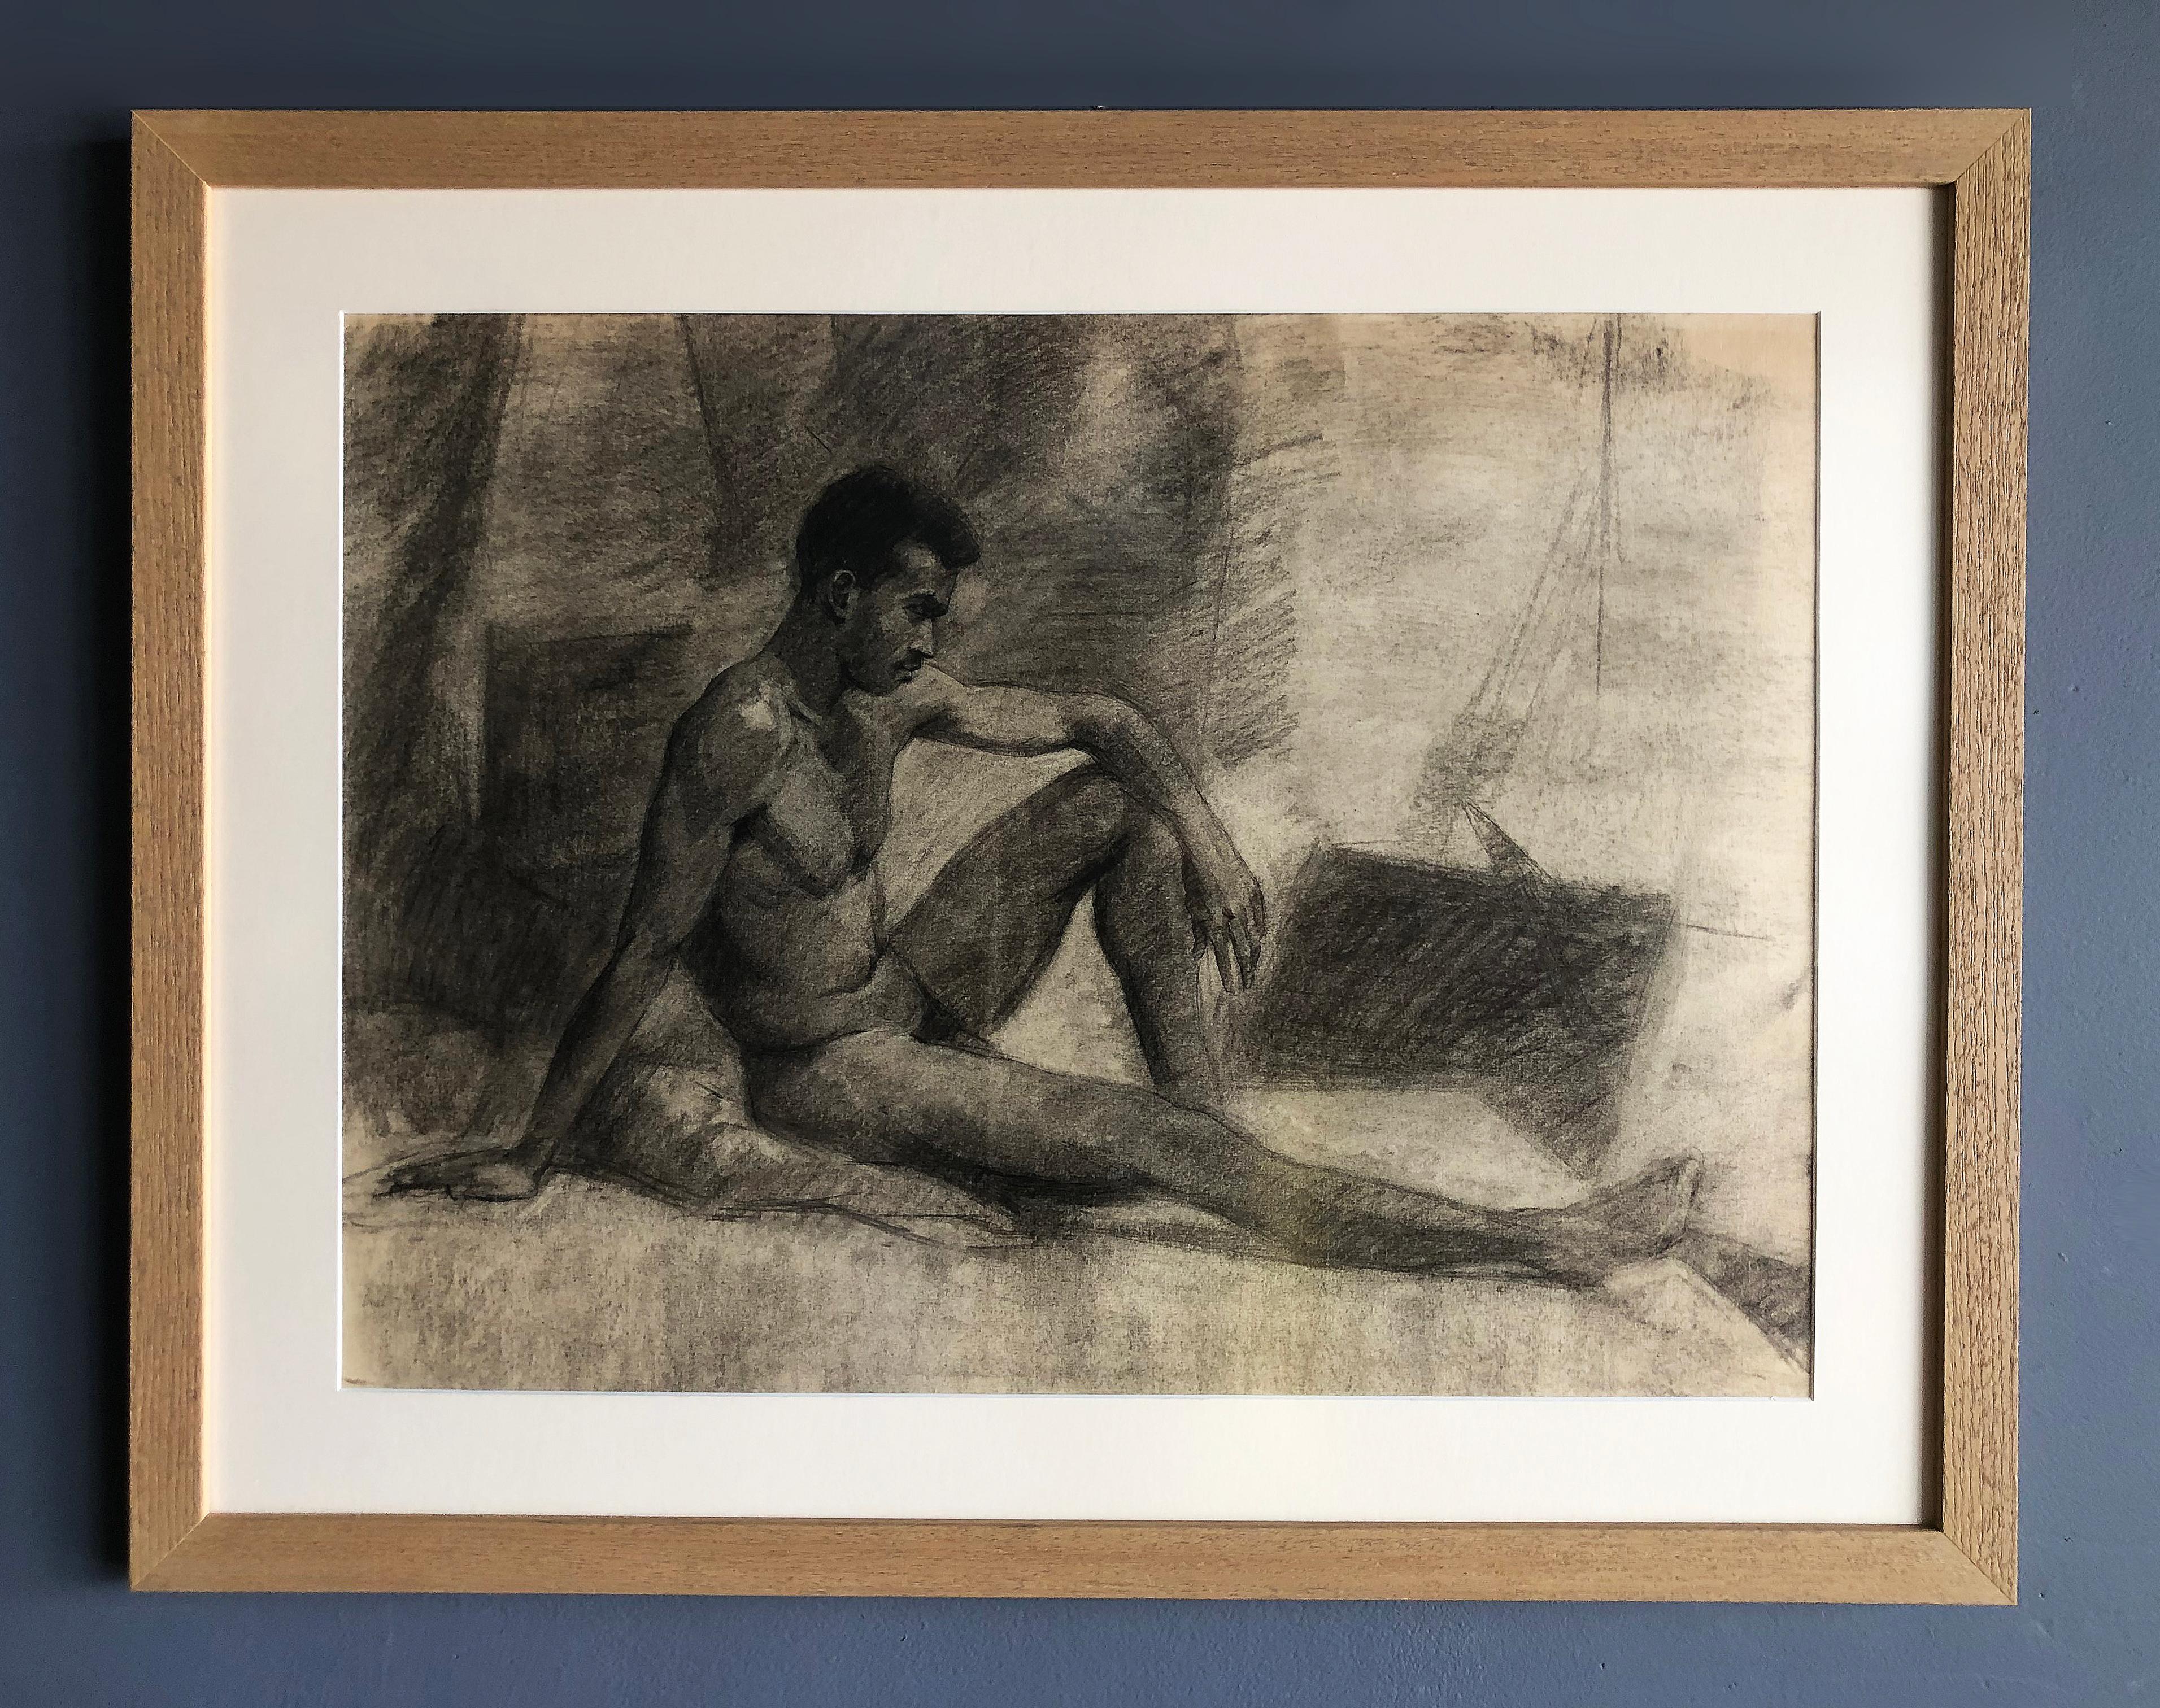 1940s male nude art study drawing in charcoal on paper

Offered for sale is an original 1940s male nude study drawing in charcoal on paper. The work has been newly matted and framed under non-glare plexiglass. We offer a companion drawing in a